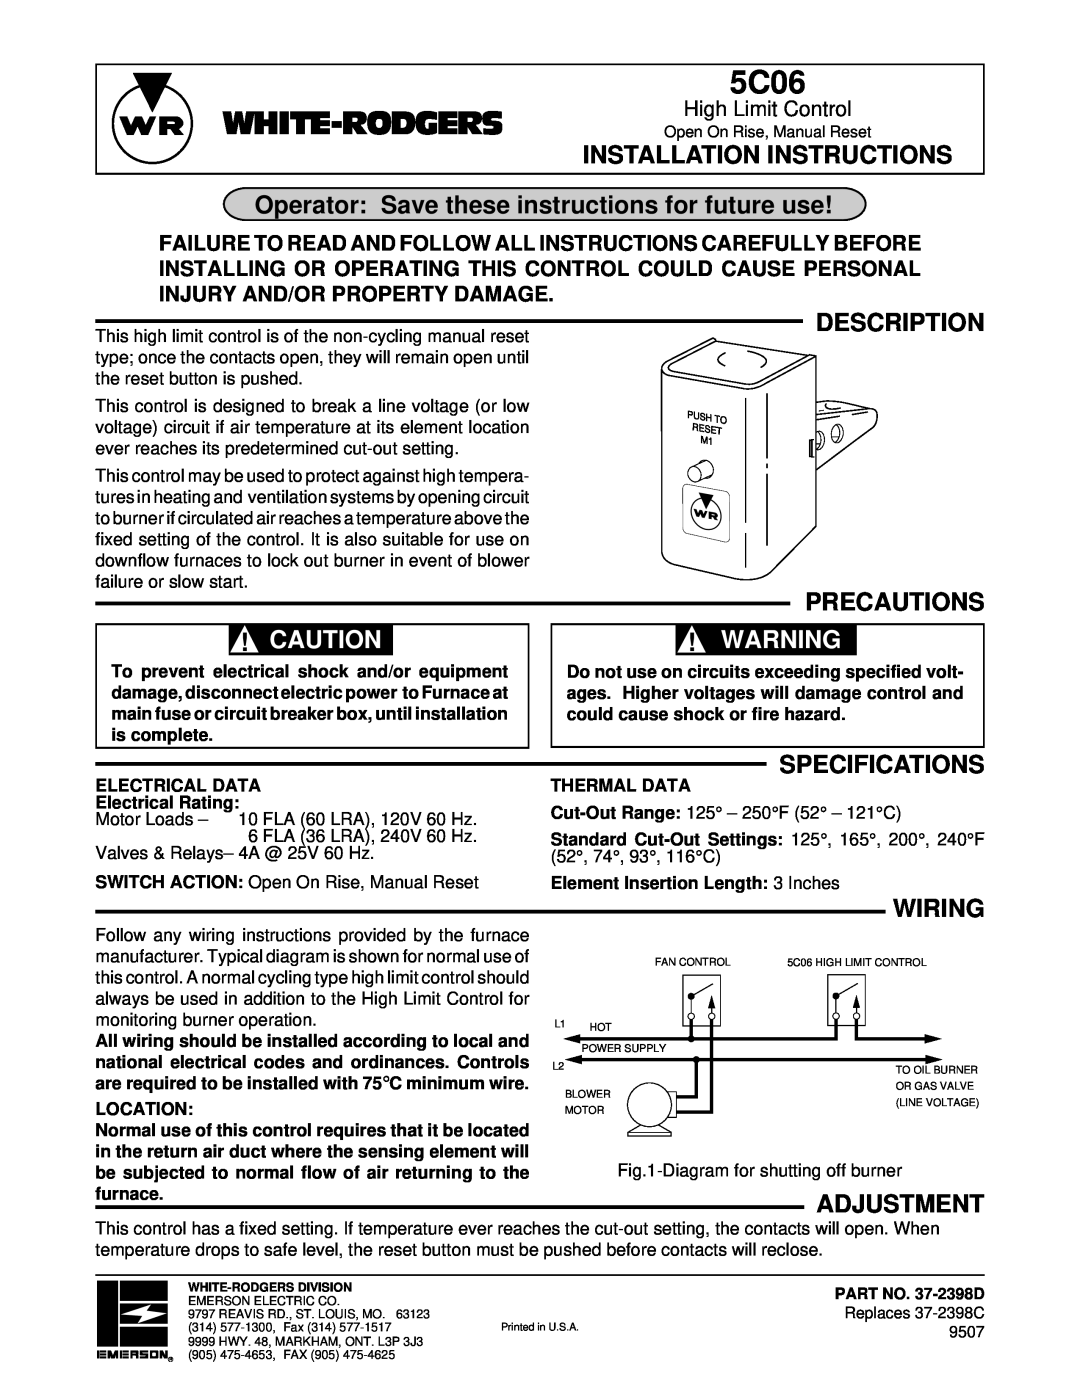 Emerson 5C06 installation instructions White-Rodgers, Installation Instructions, Description Precautions, Specifications 